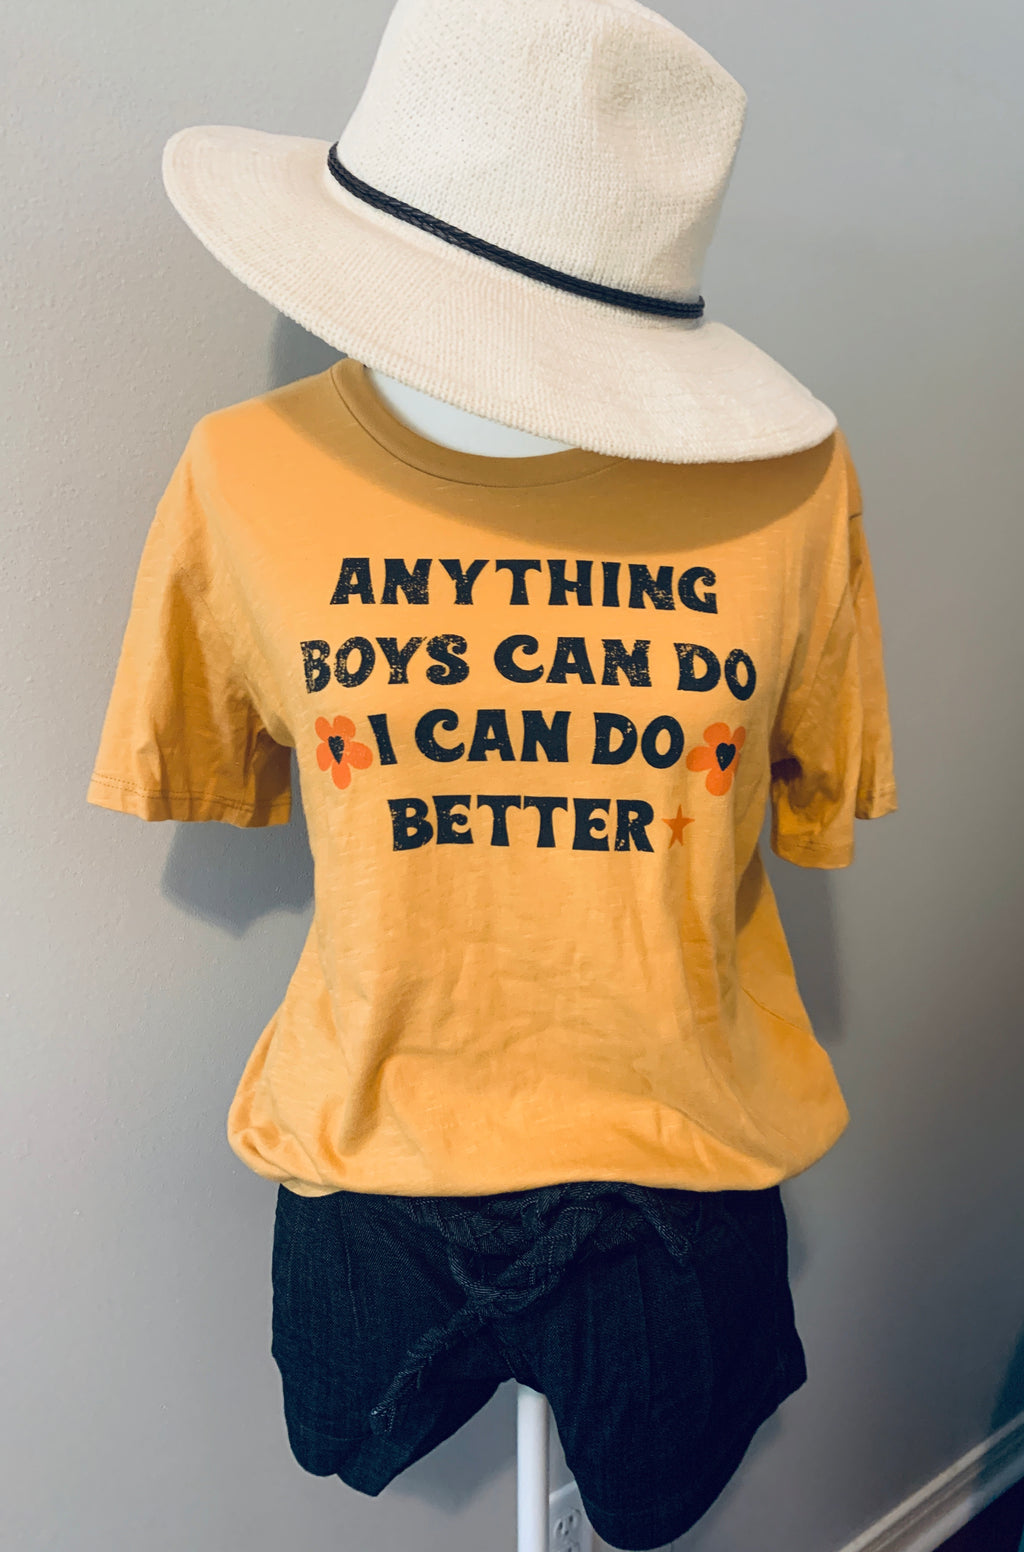 "Girls Rule" Anything boys can do I can do better top